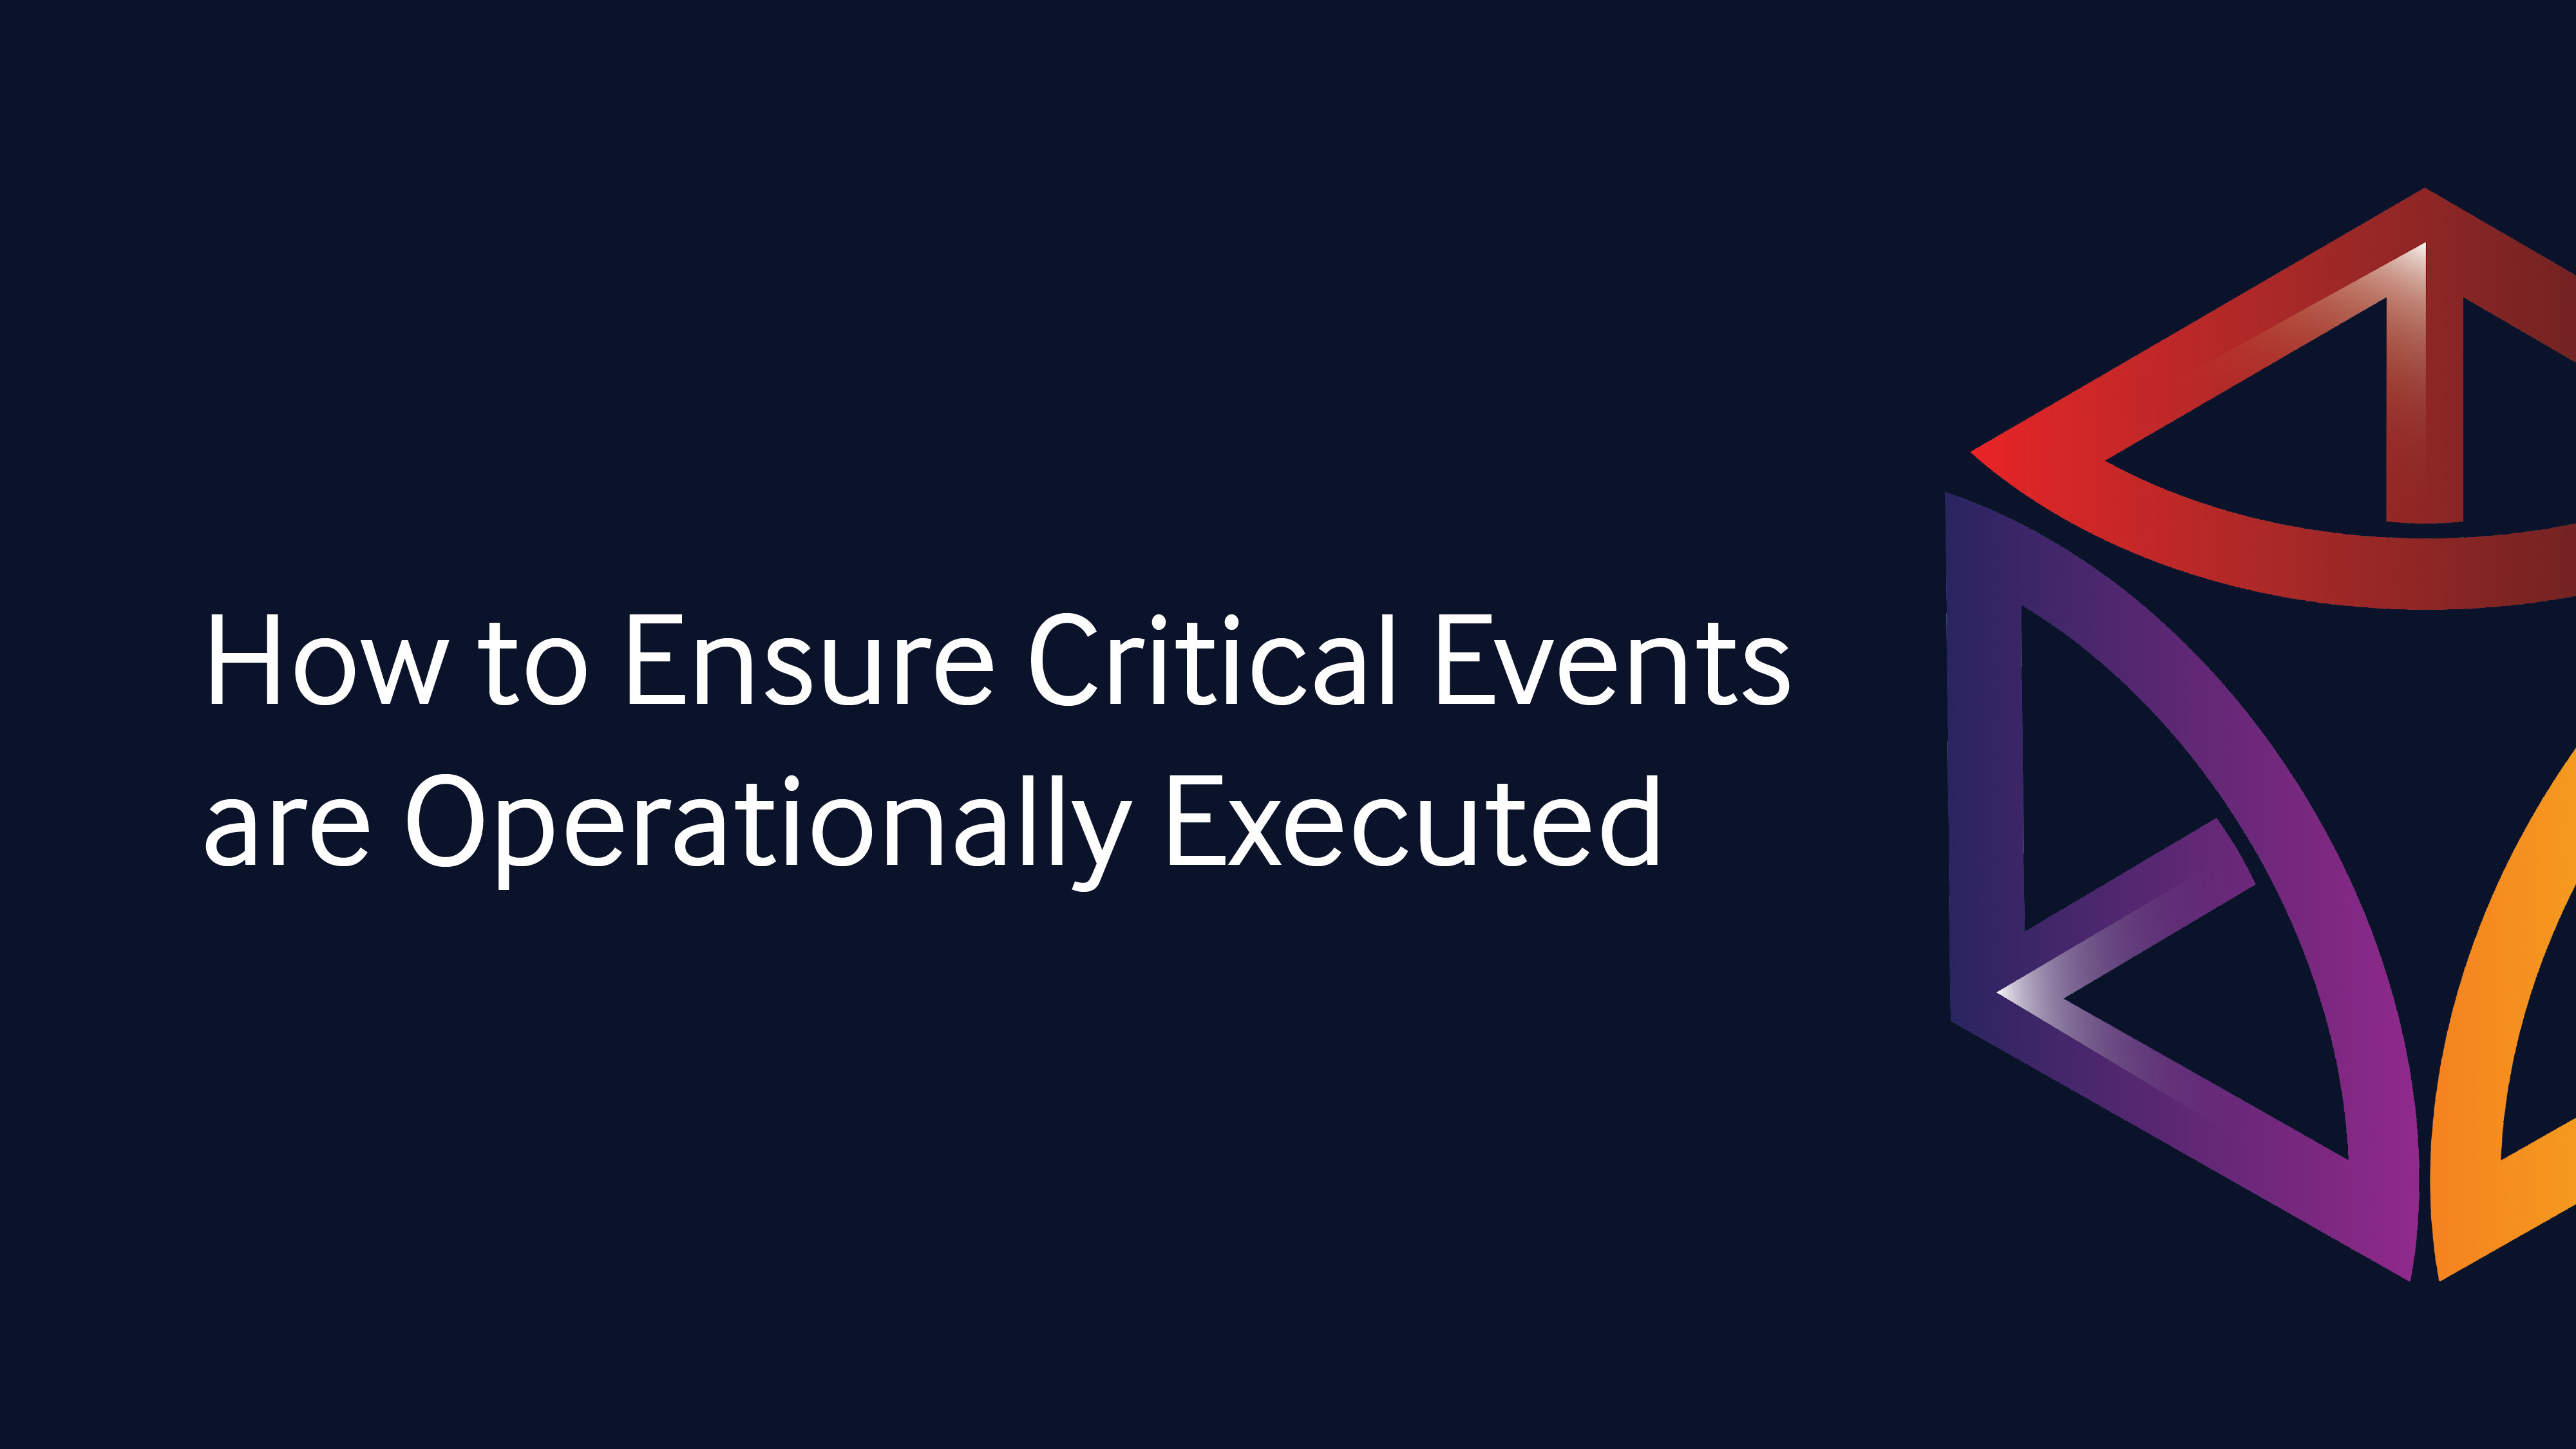 How to Ensure Critical Events are Operationally Executed